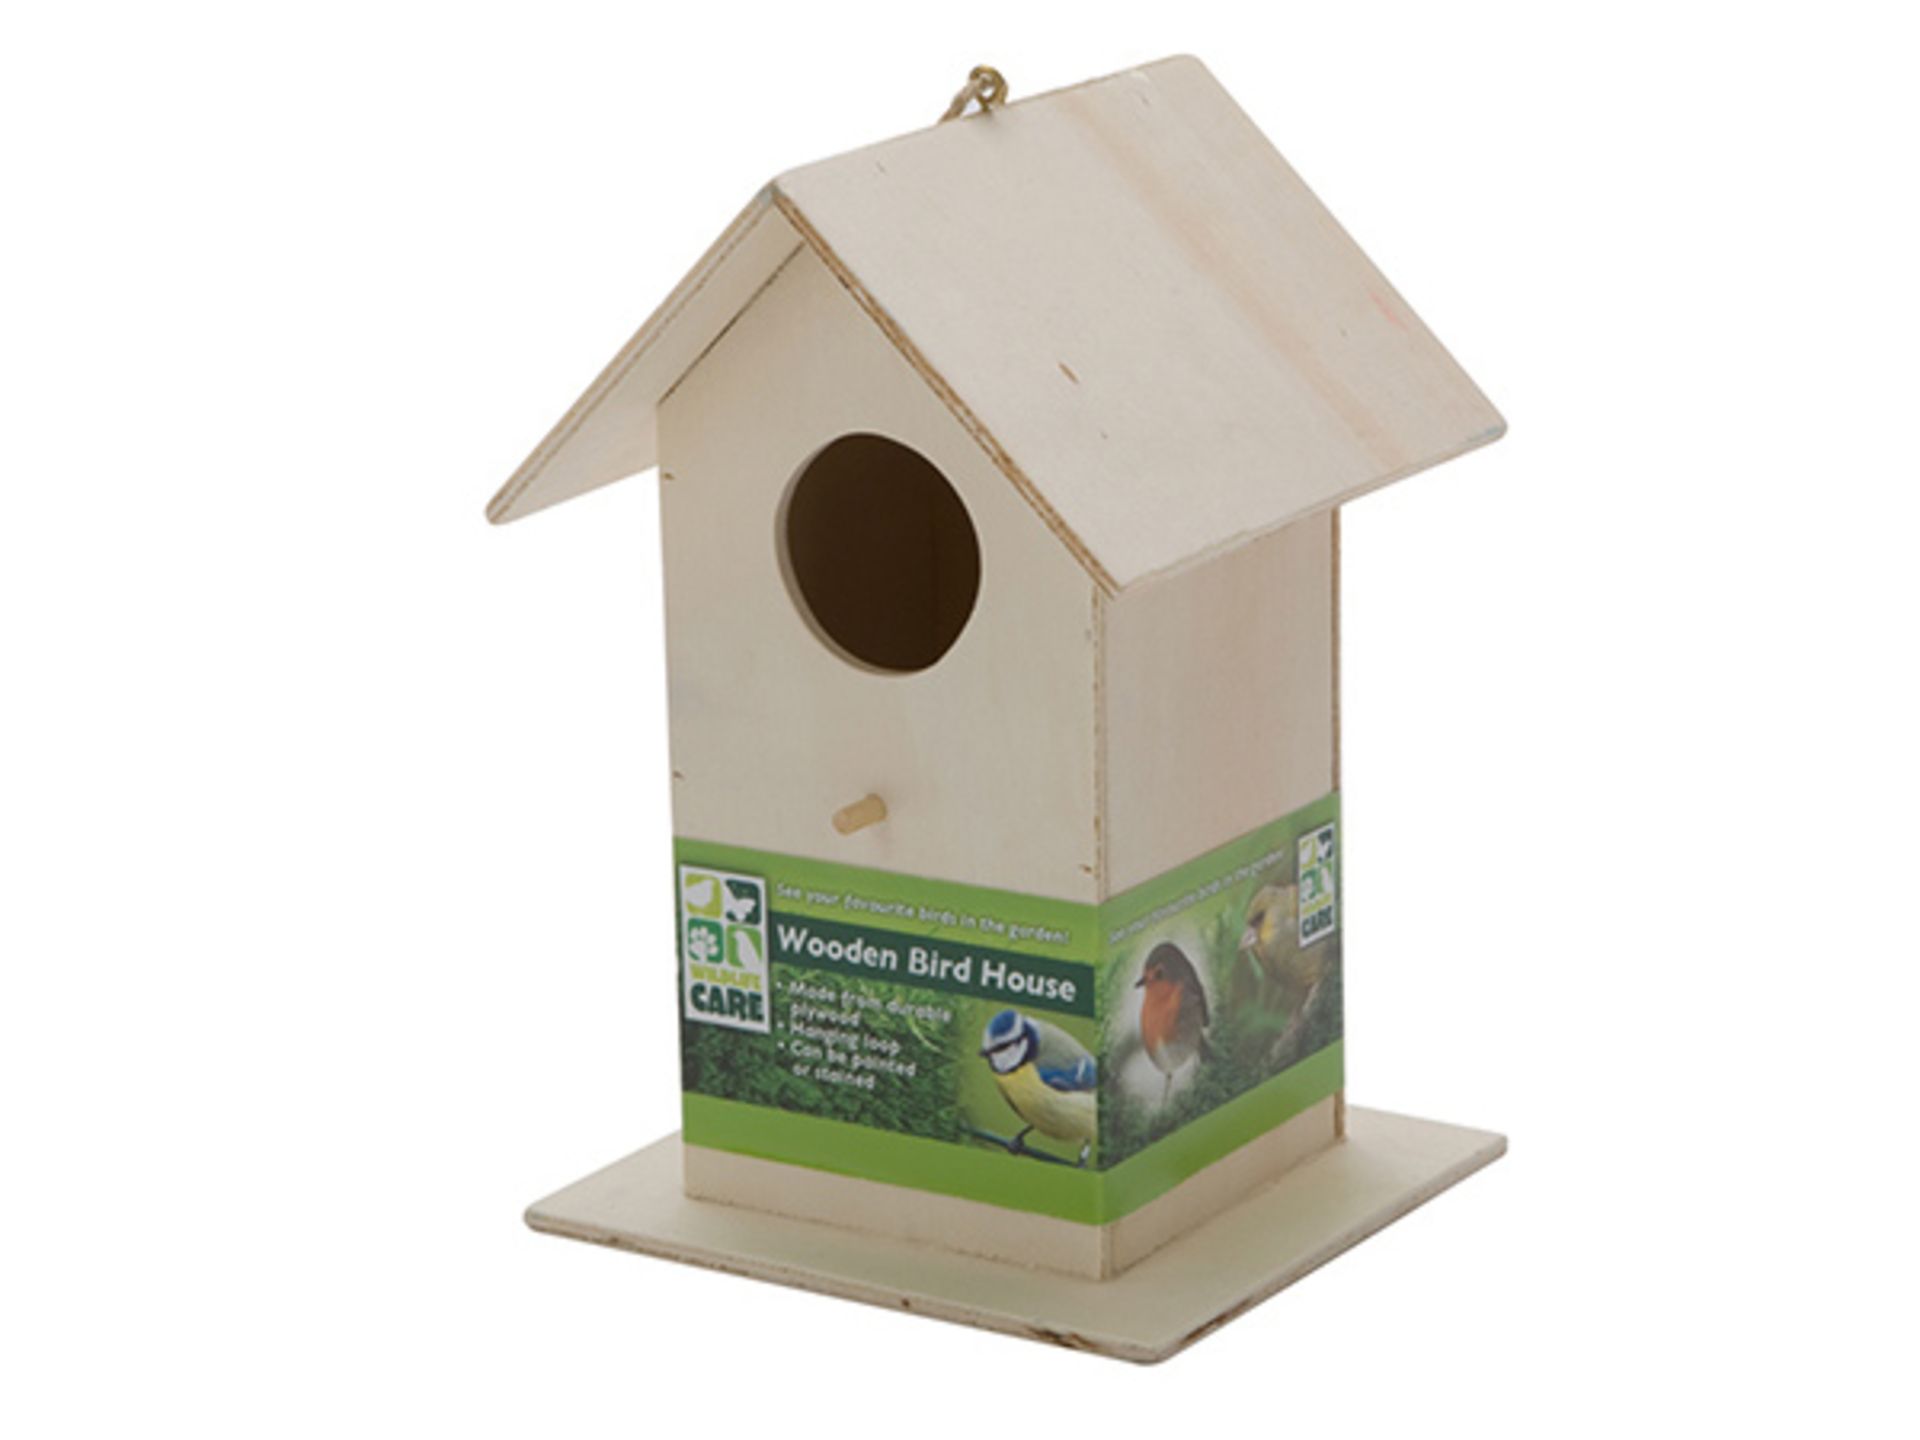 V *TRADE QTY* Brand New Wooden Bird House With Hanging Or Hook Mounting Fixing 18 x 8 cm X 3 YOUR